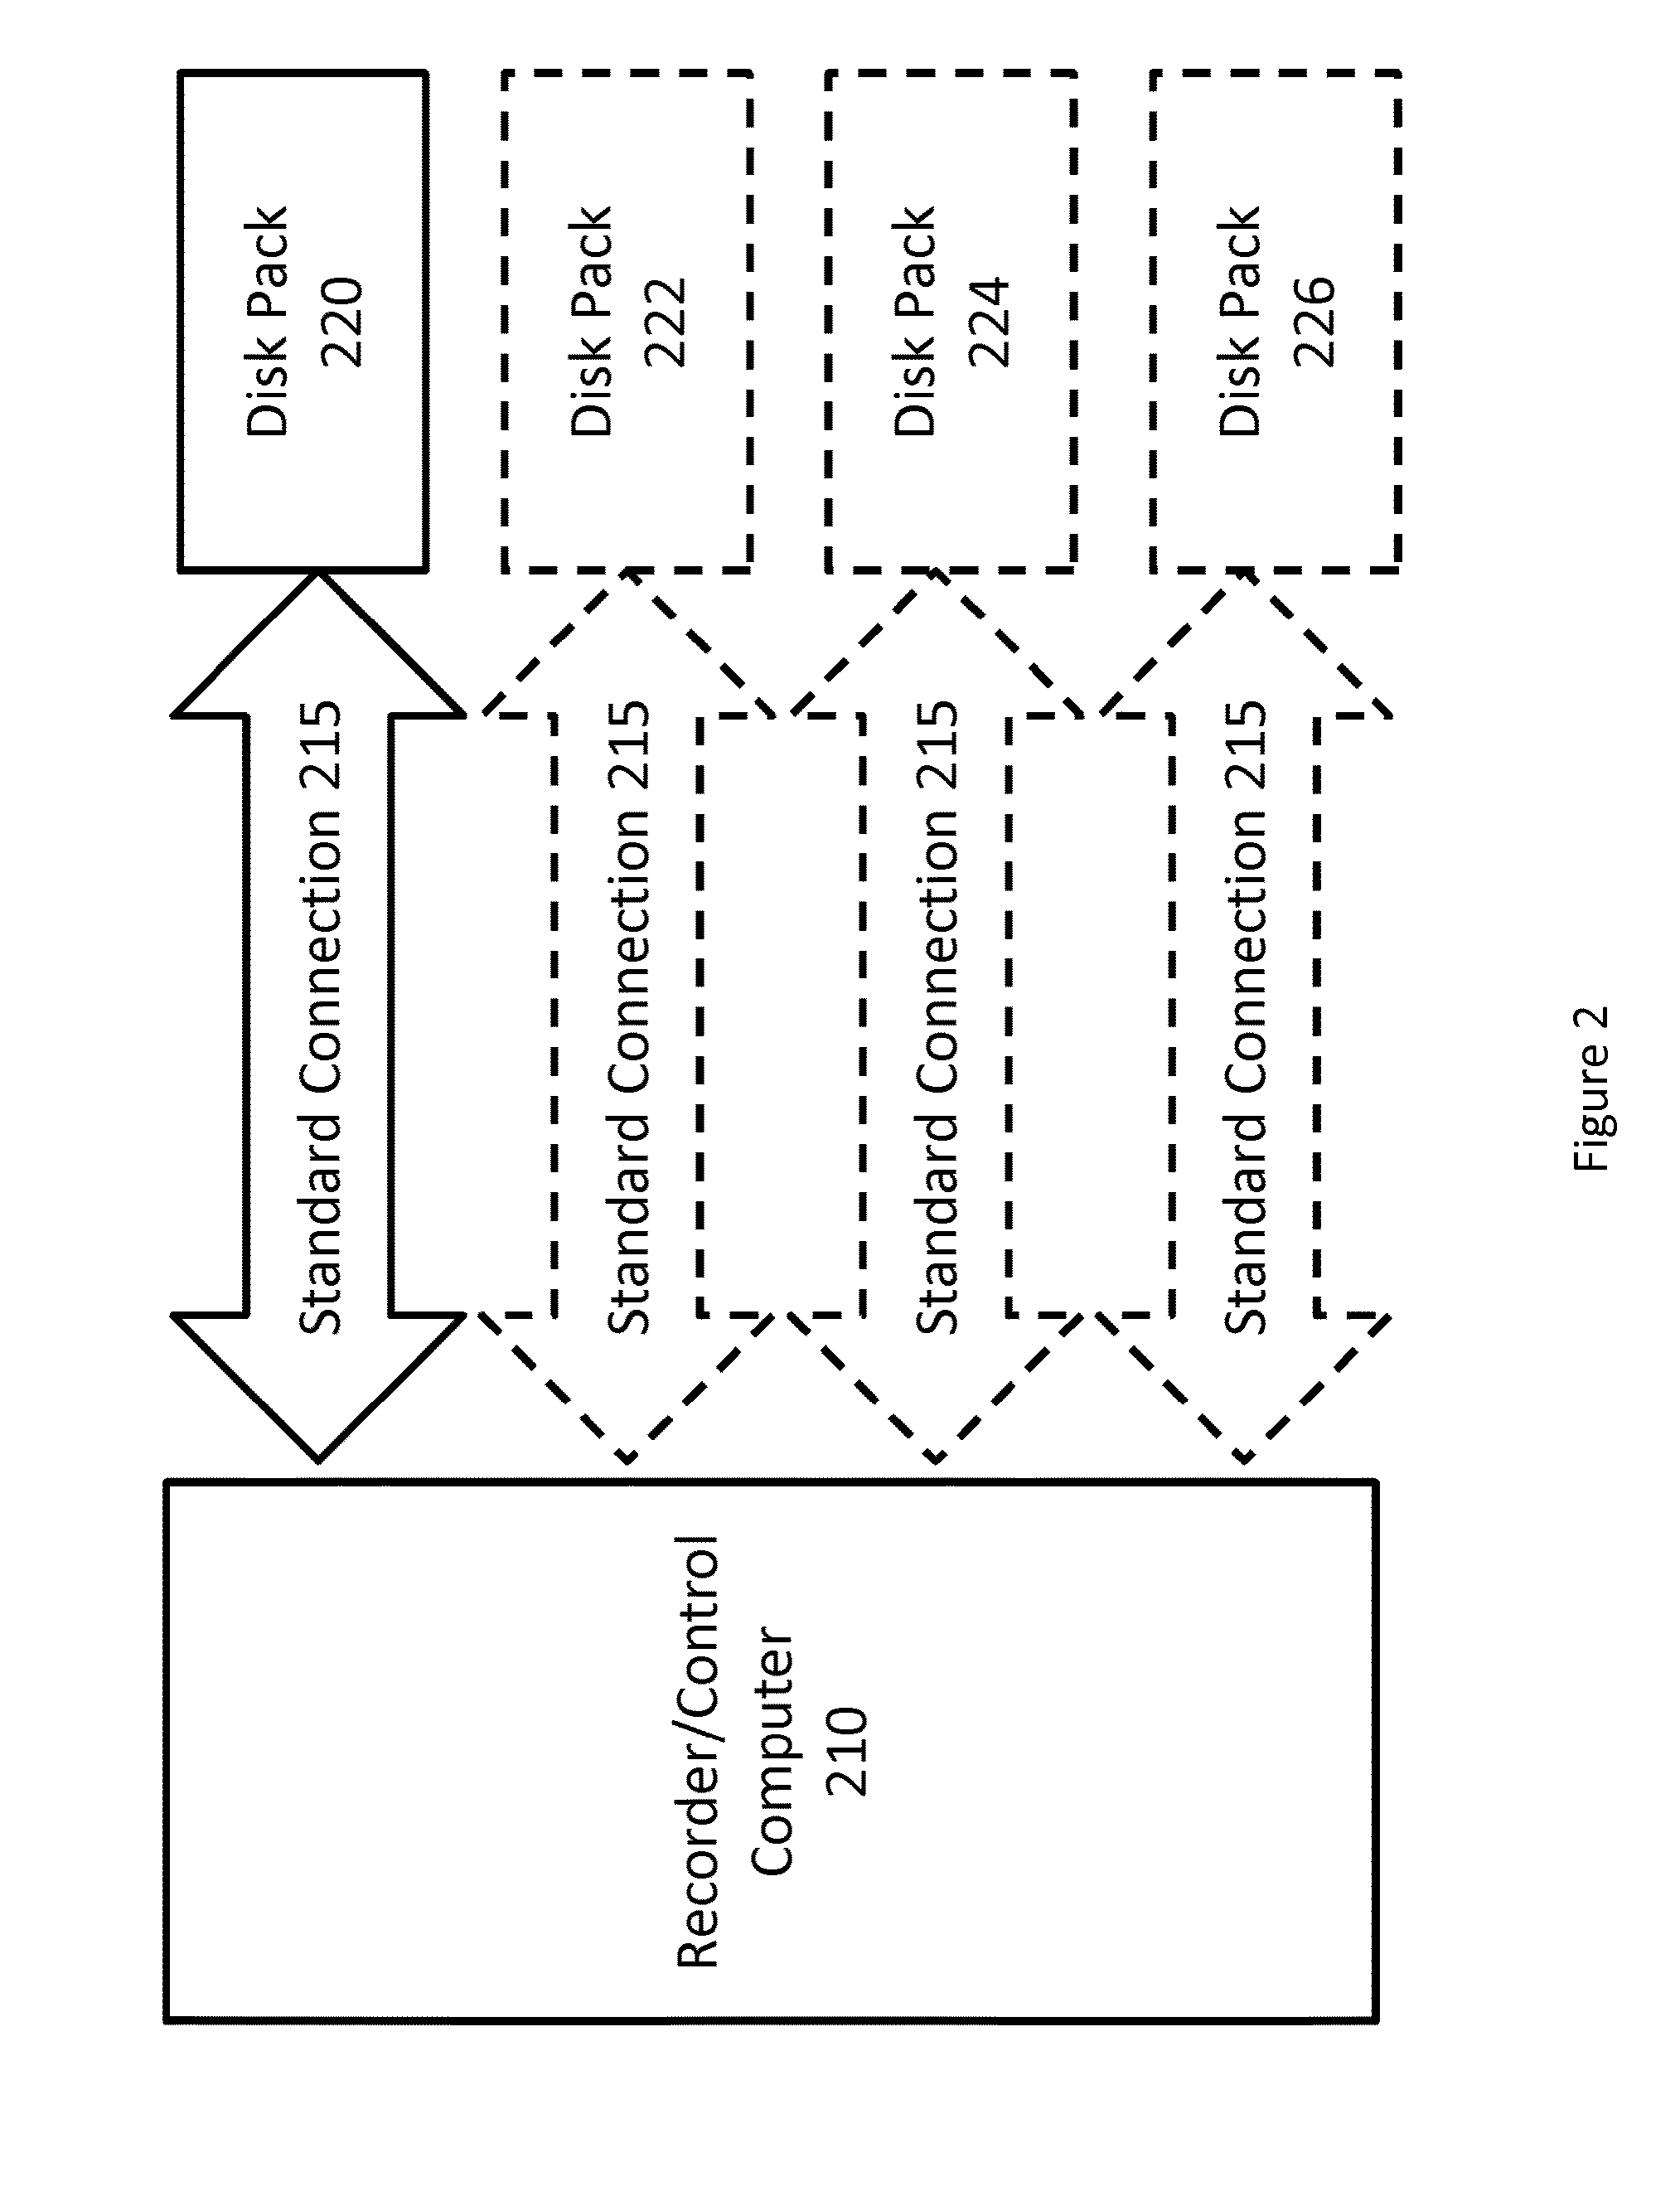 System and method for high-speed data recording